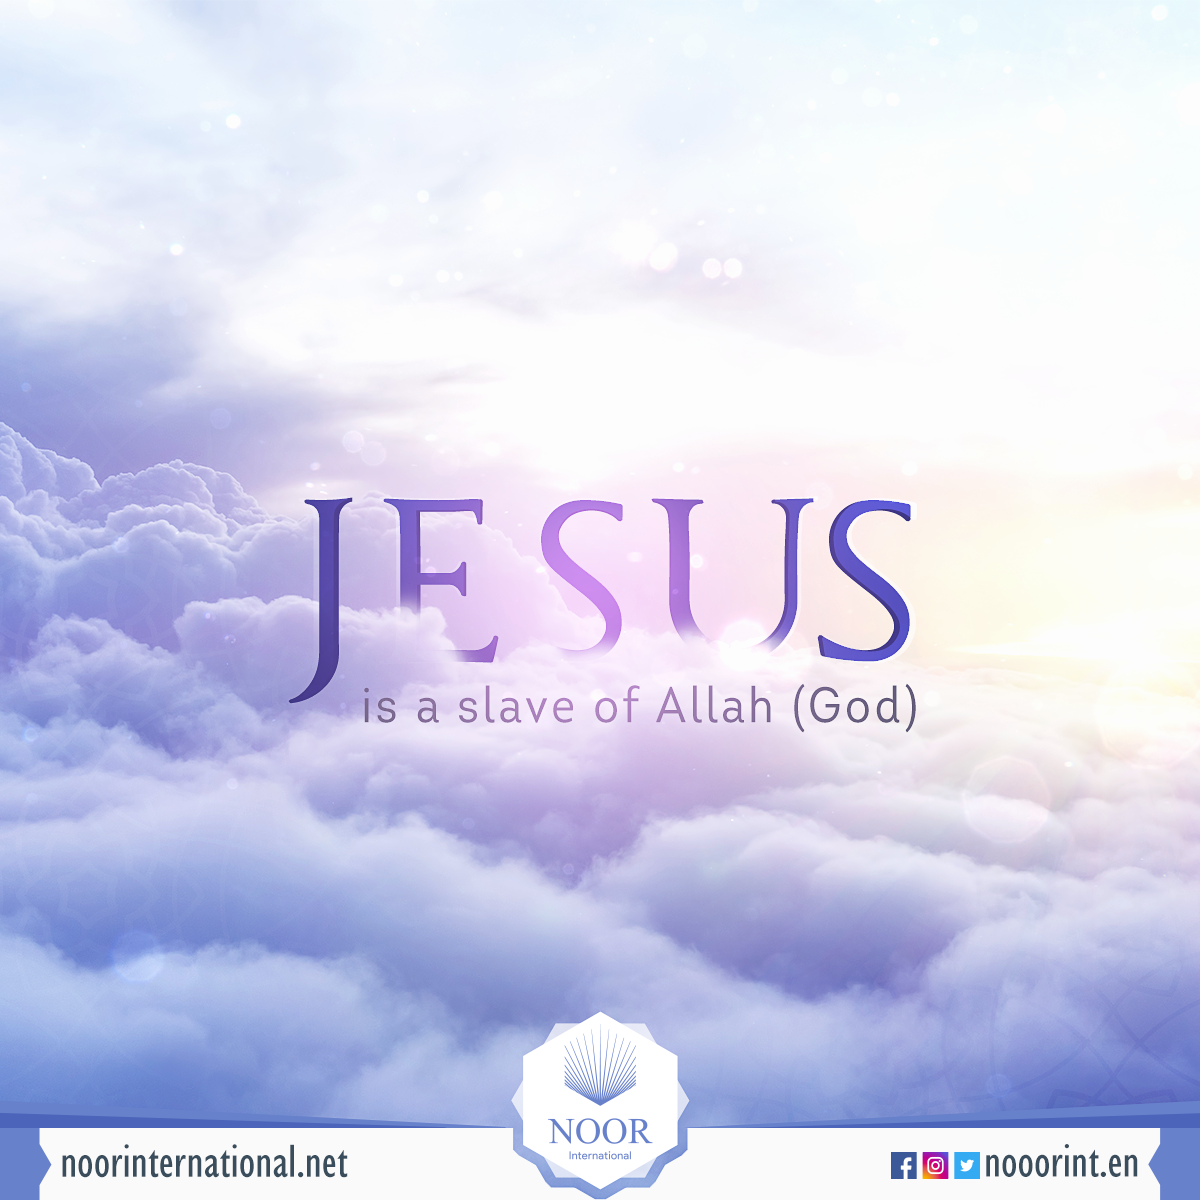 Jesus is a slave of Allah